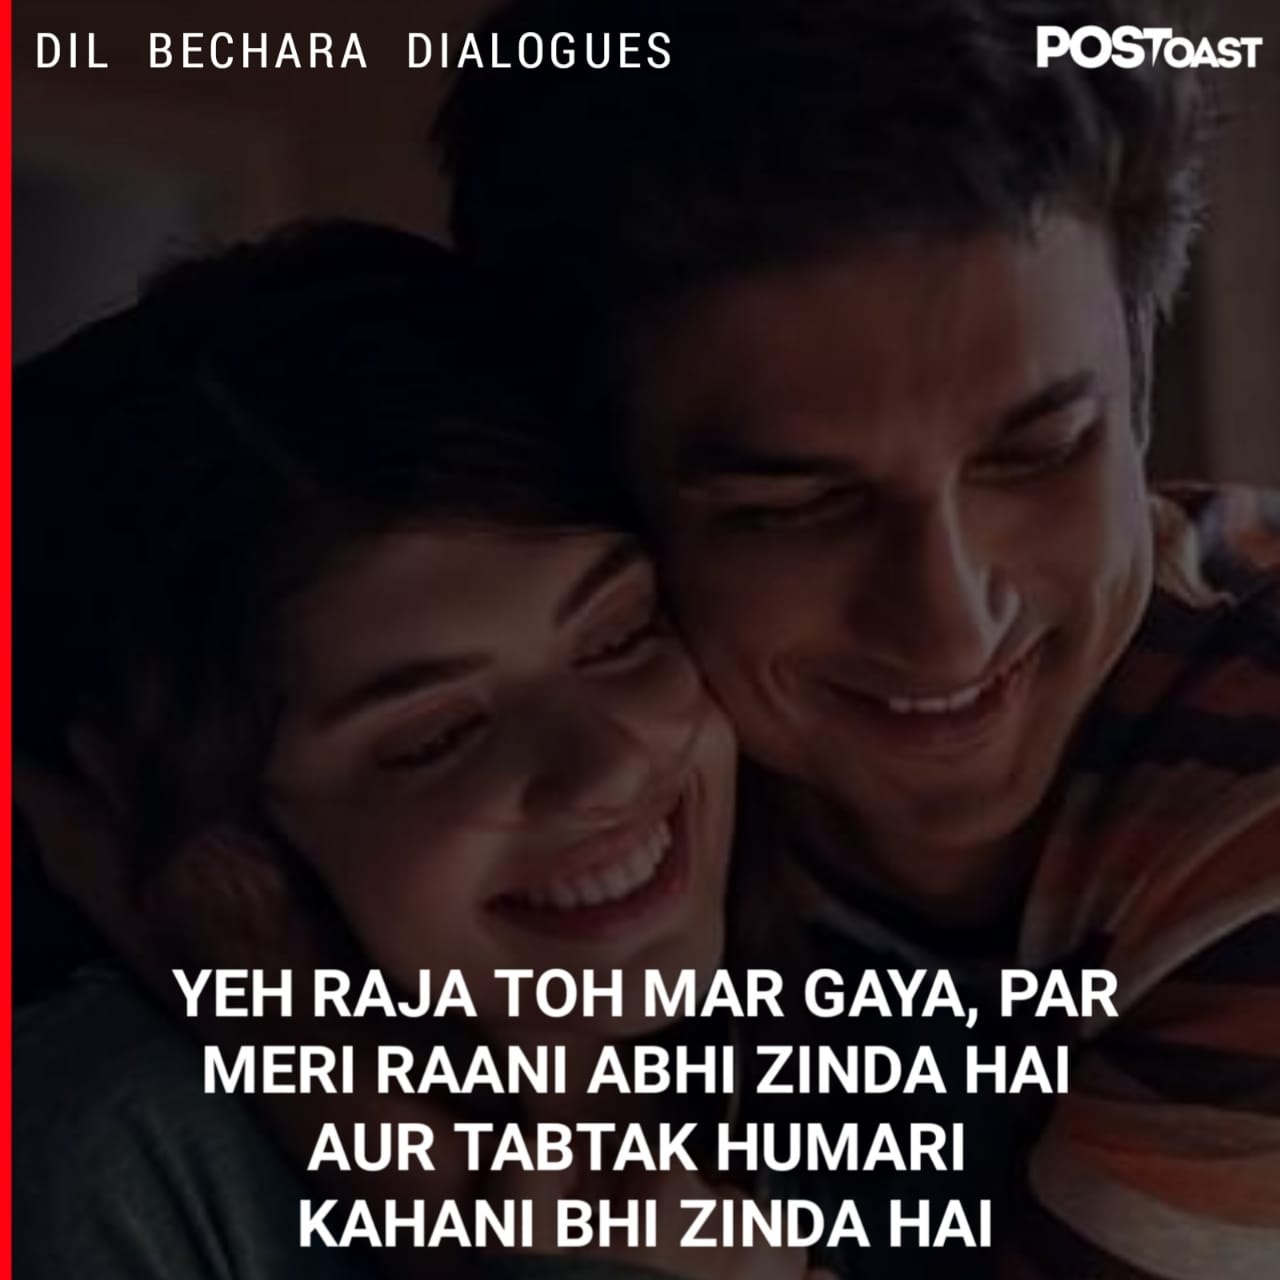 17 Dialogues From ‘Dil Bechara’ That Will Remain In Our Memories Forever